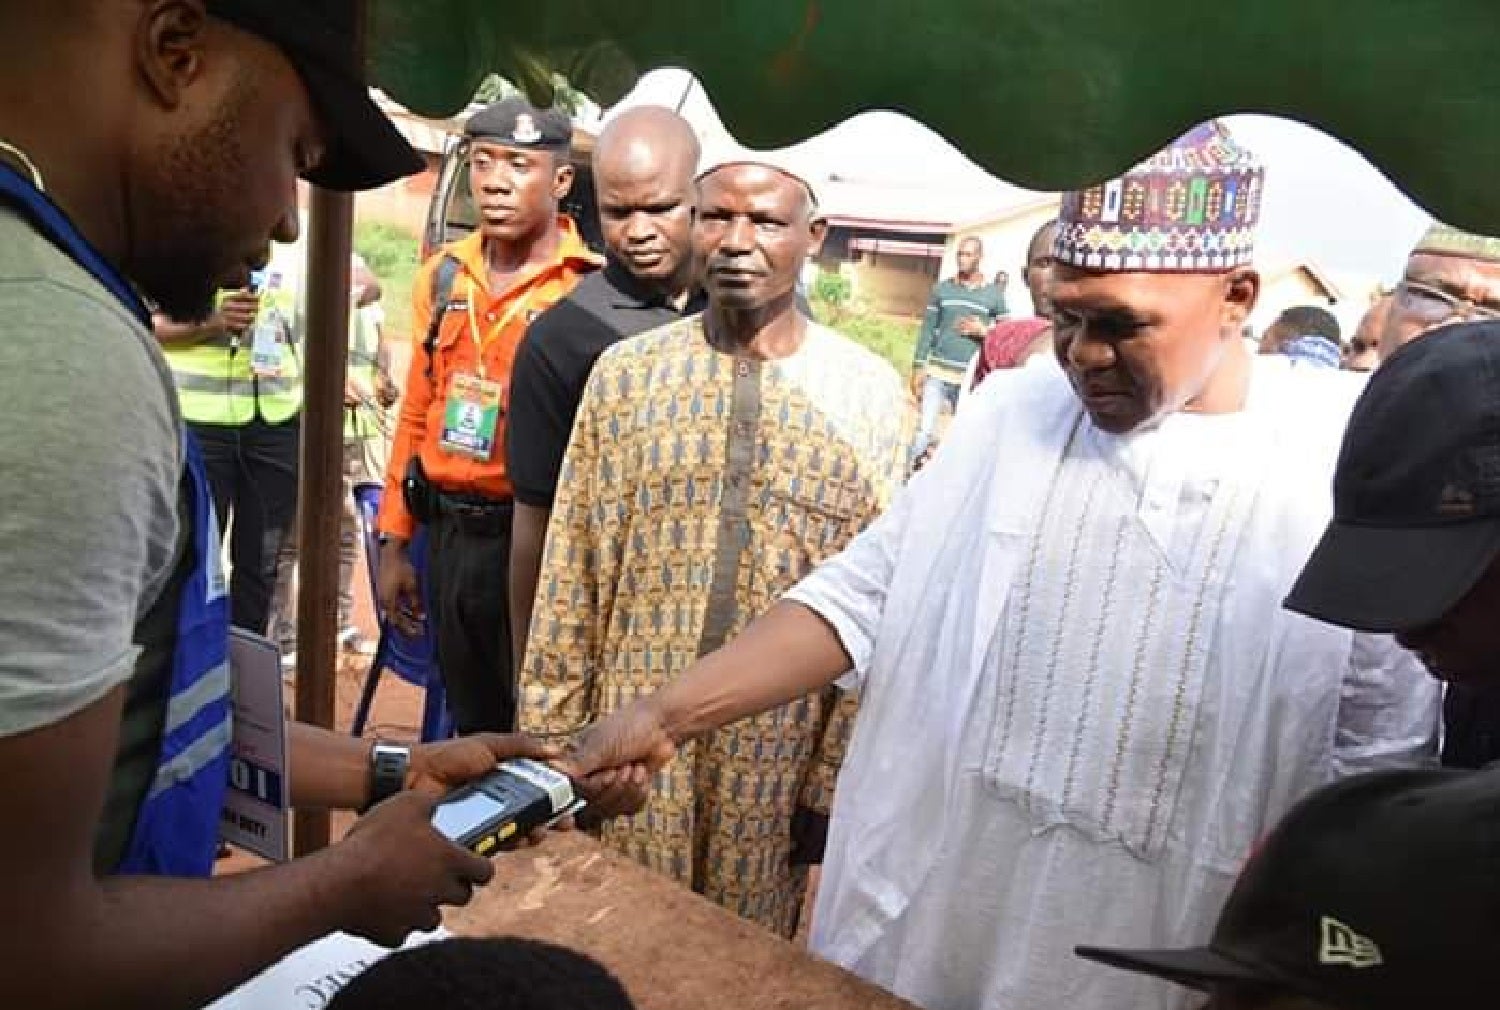 The Peoples Democratic Party (PDP) governorship candidate in Kogi State, Engr Musa Wada, has been accredited and cast his vote. Read more at: https://www.vanguardngr.com/2019/11/kogidecides2019-musa-wada-of-pdp-cast-vote/